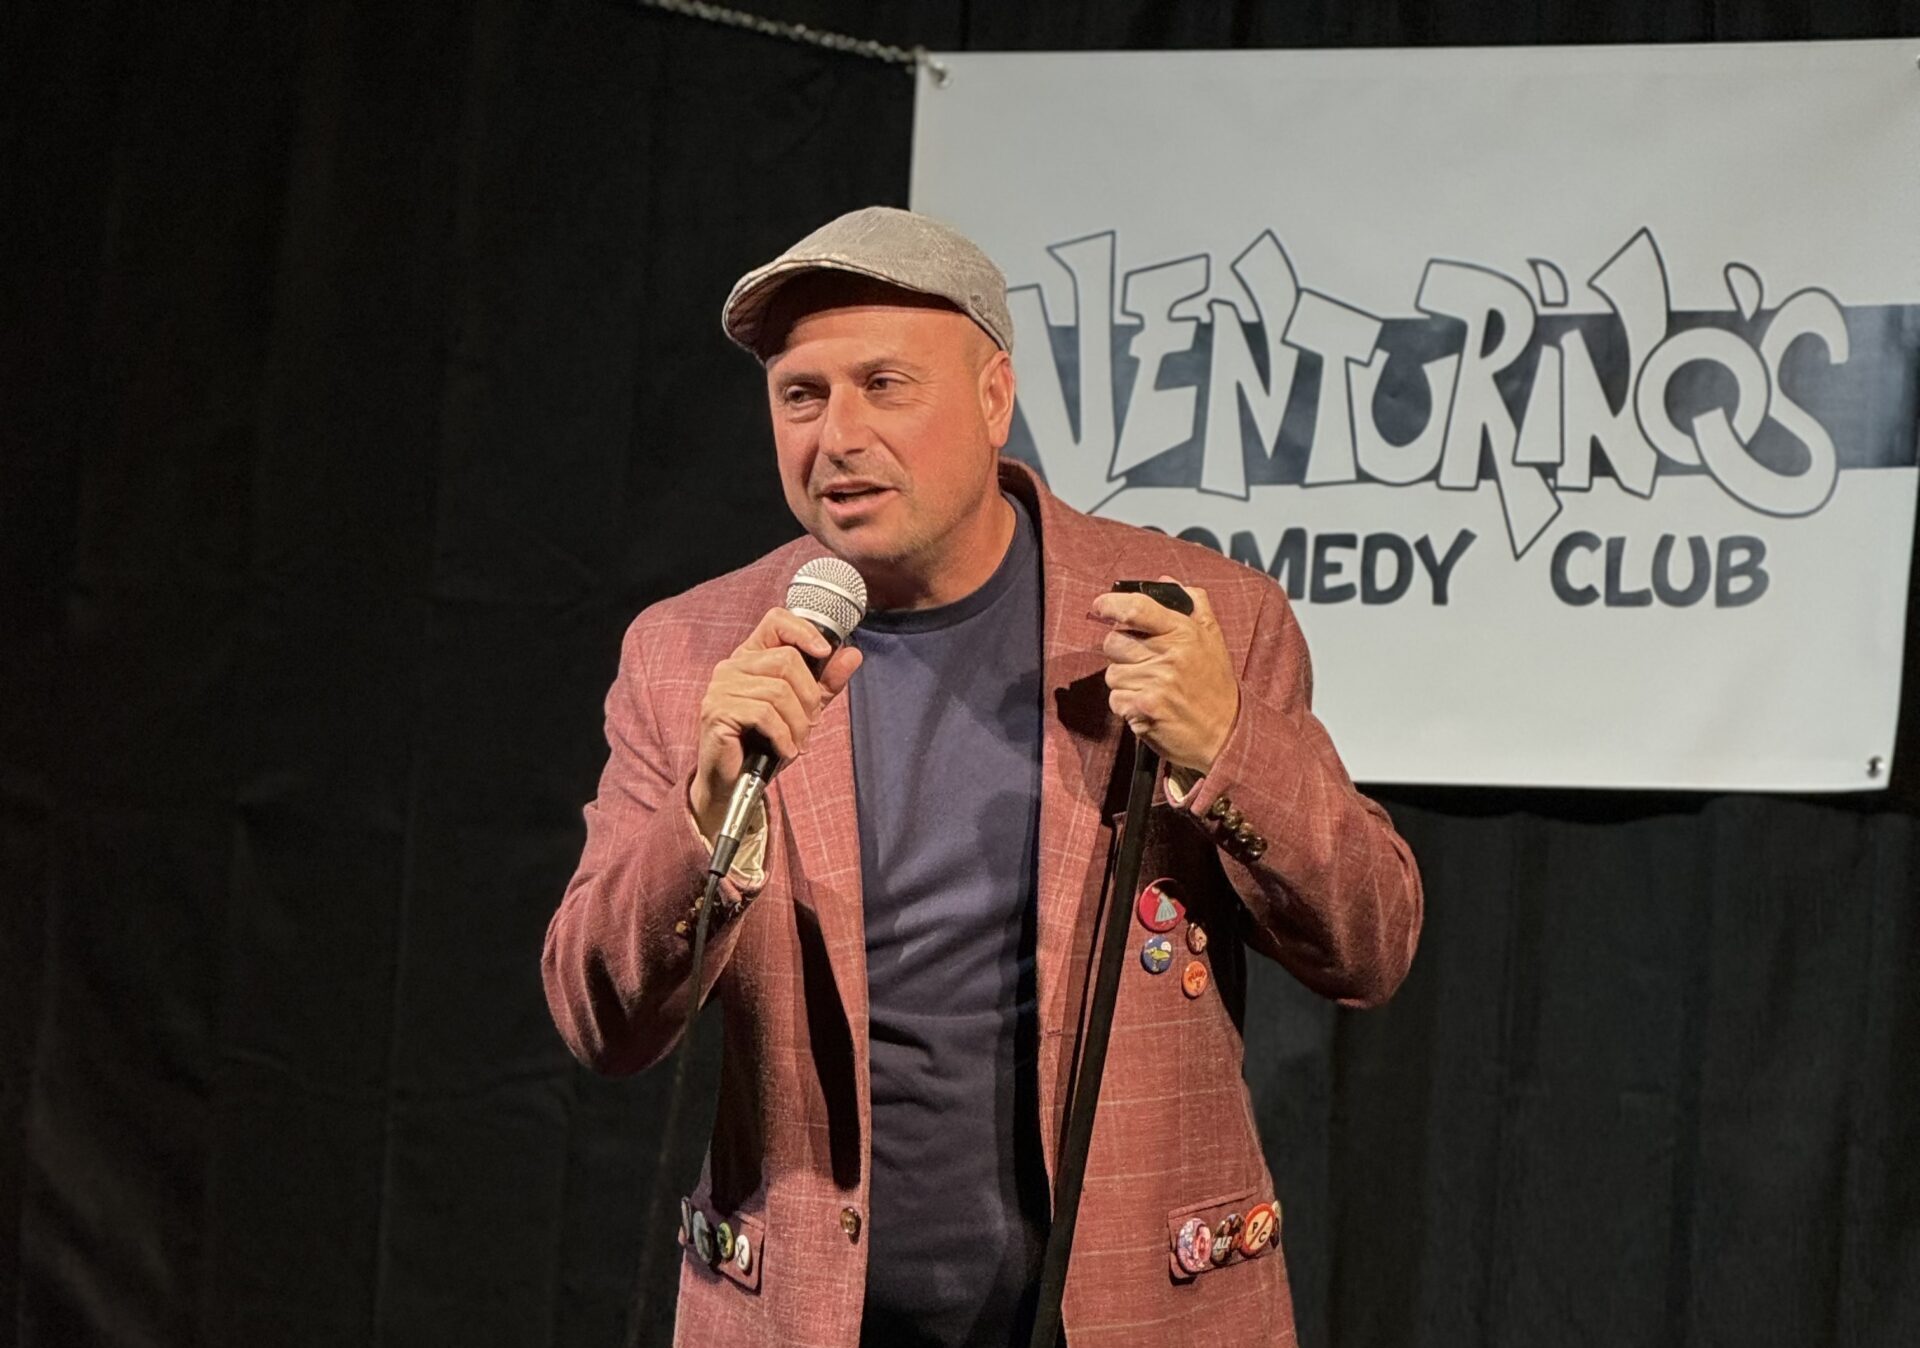 Venturino’s Comedy Club is inside Embassy Suites by Hilton, 10450 Corkscrew Commons Drive in Estero.